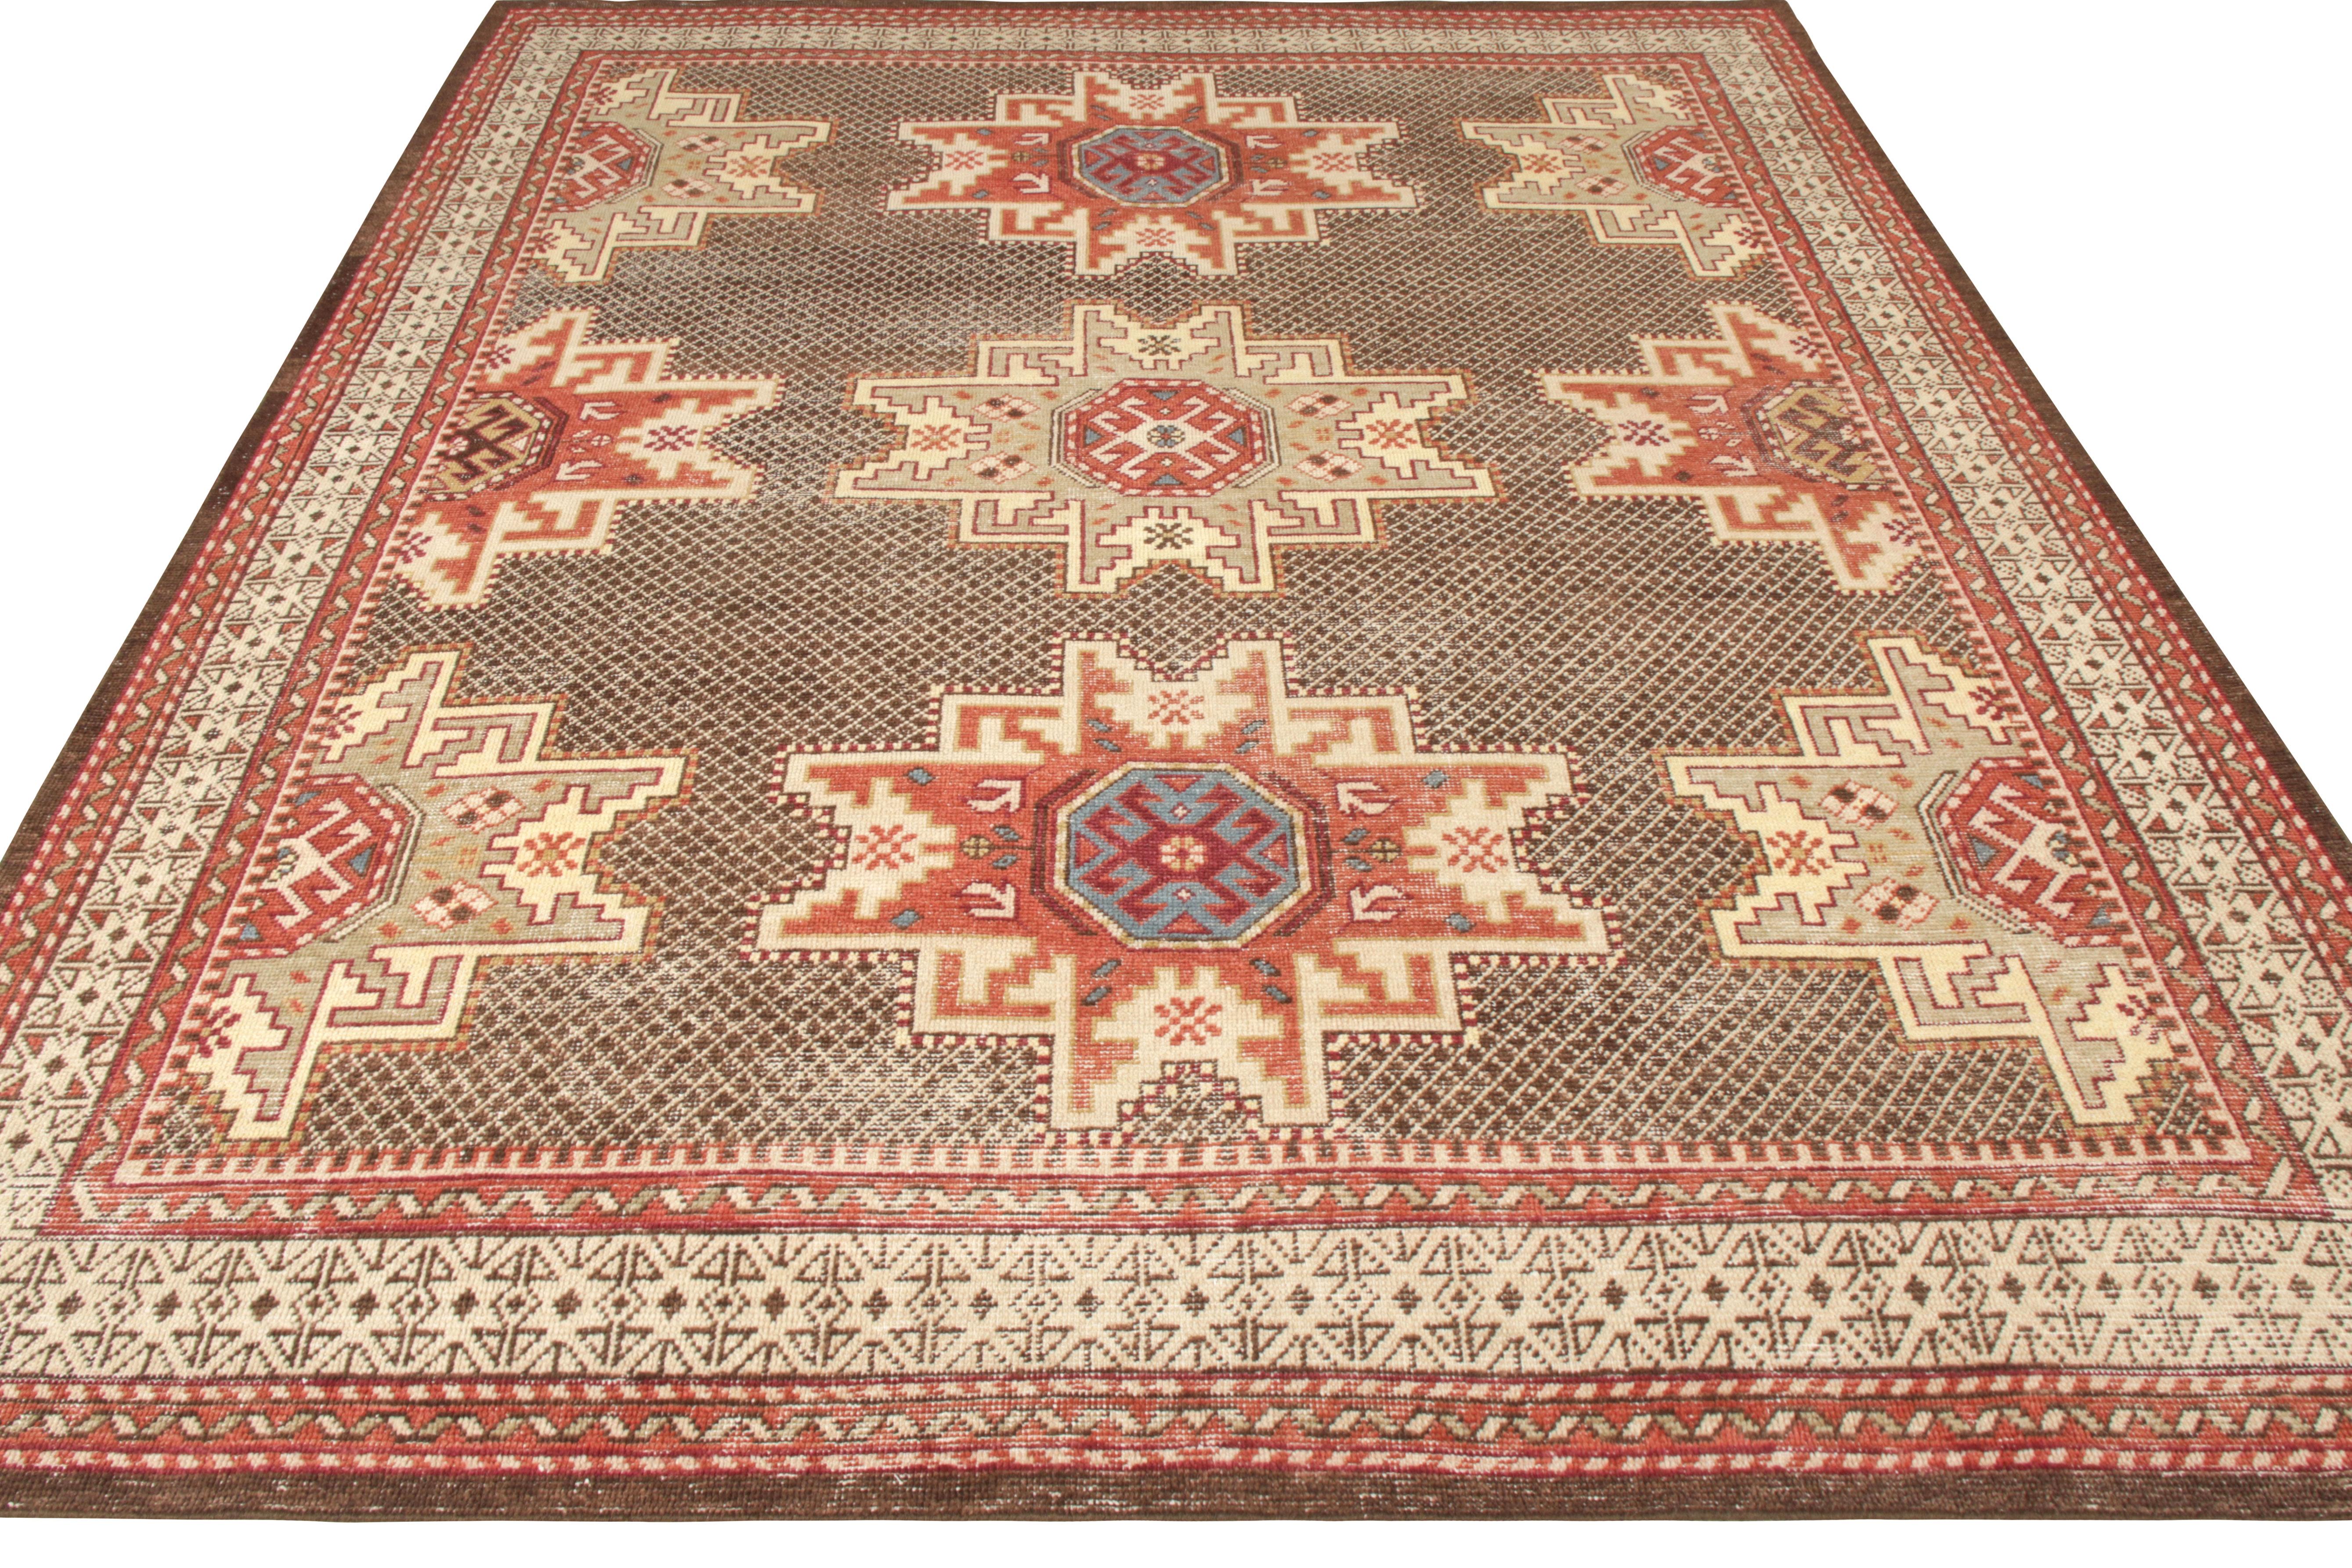 Expressing a modern take on Caucasian Kuba rug style, Rug & Kilim presents an 8 x 10 addition to its Homage Collection. Hand knotted in wool, the contemporary style enjoys a refined geometric pattern in a beige-brown colorway dotting the background.